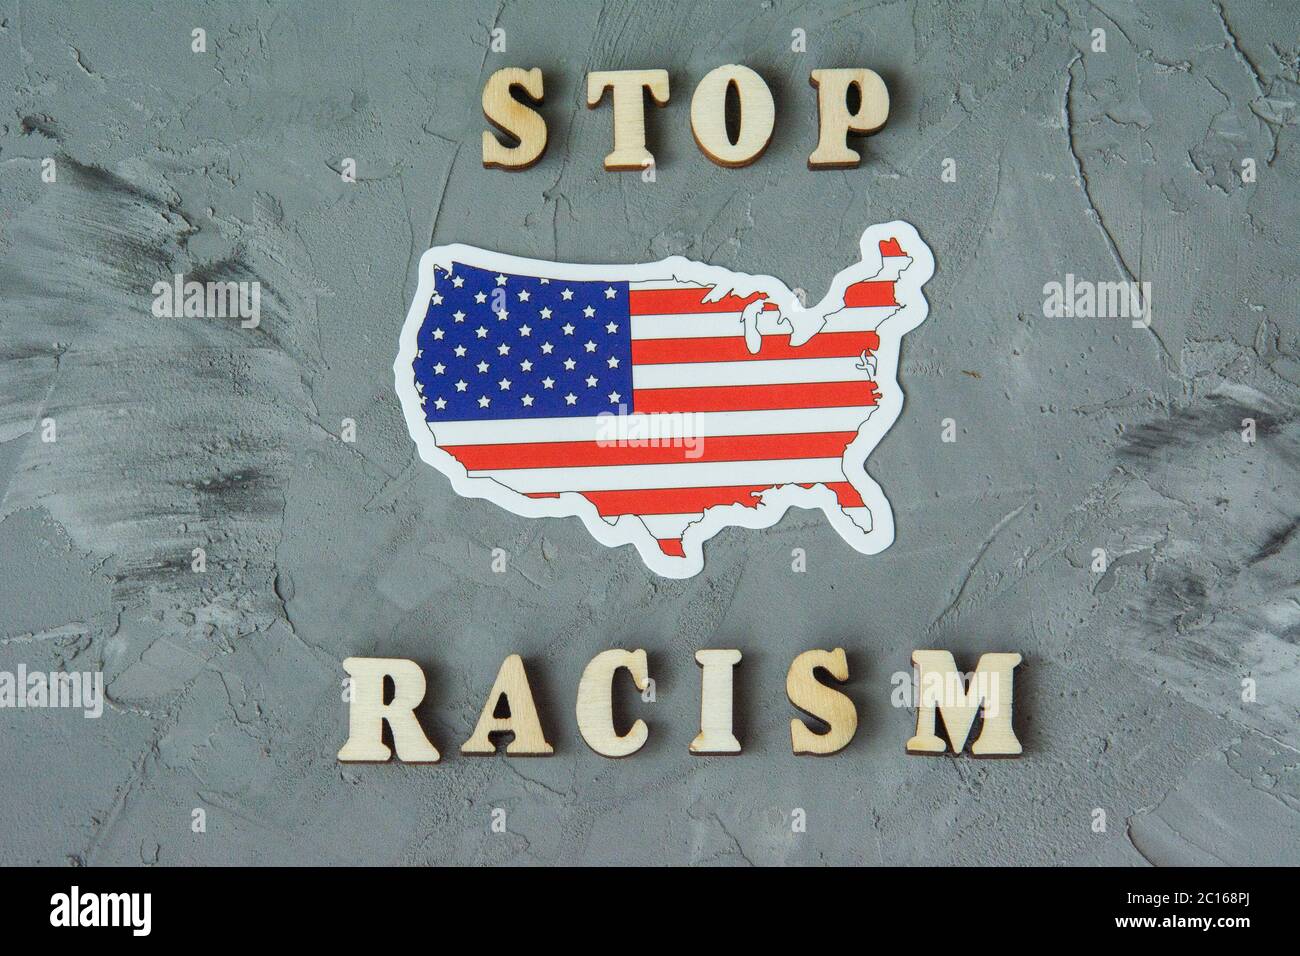 Stop racism sign flat lay on a gray background with american flag. Concept of racism. Discrimination, racial problems. Stock Photo